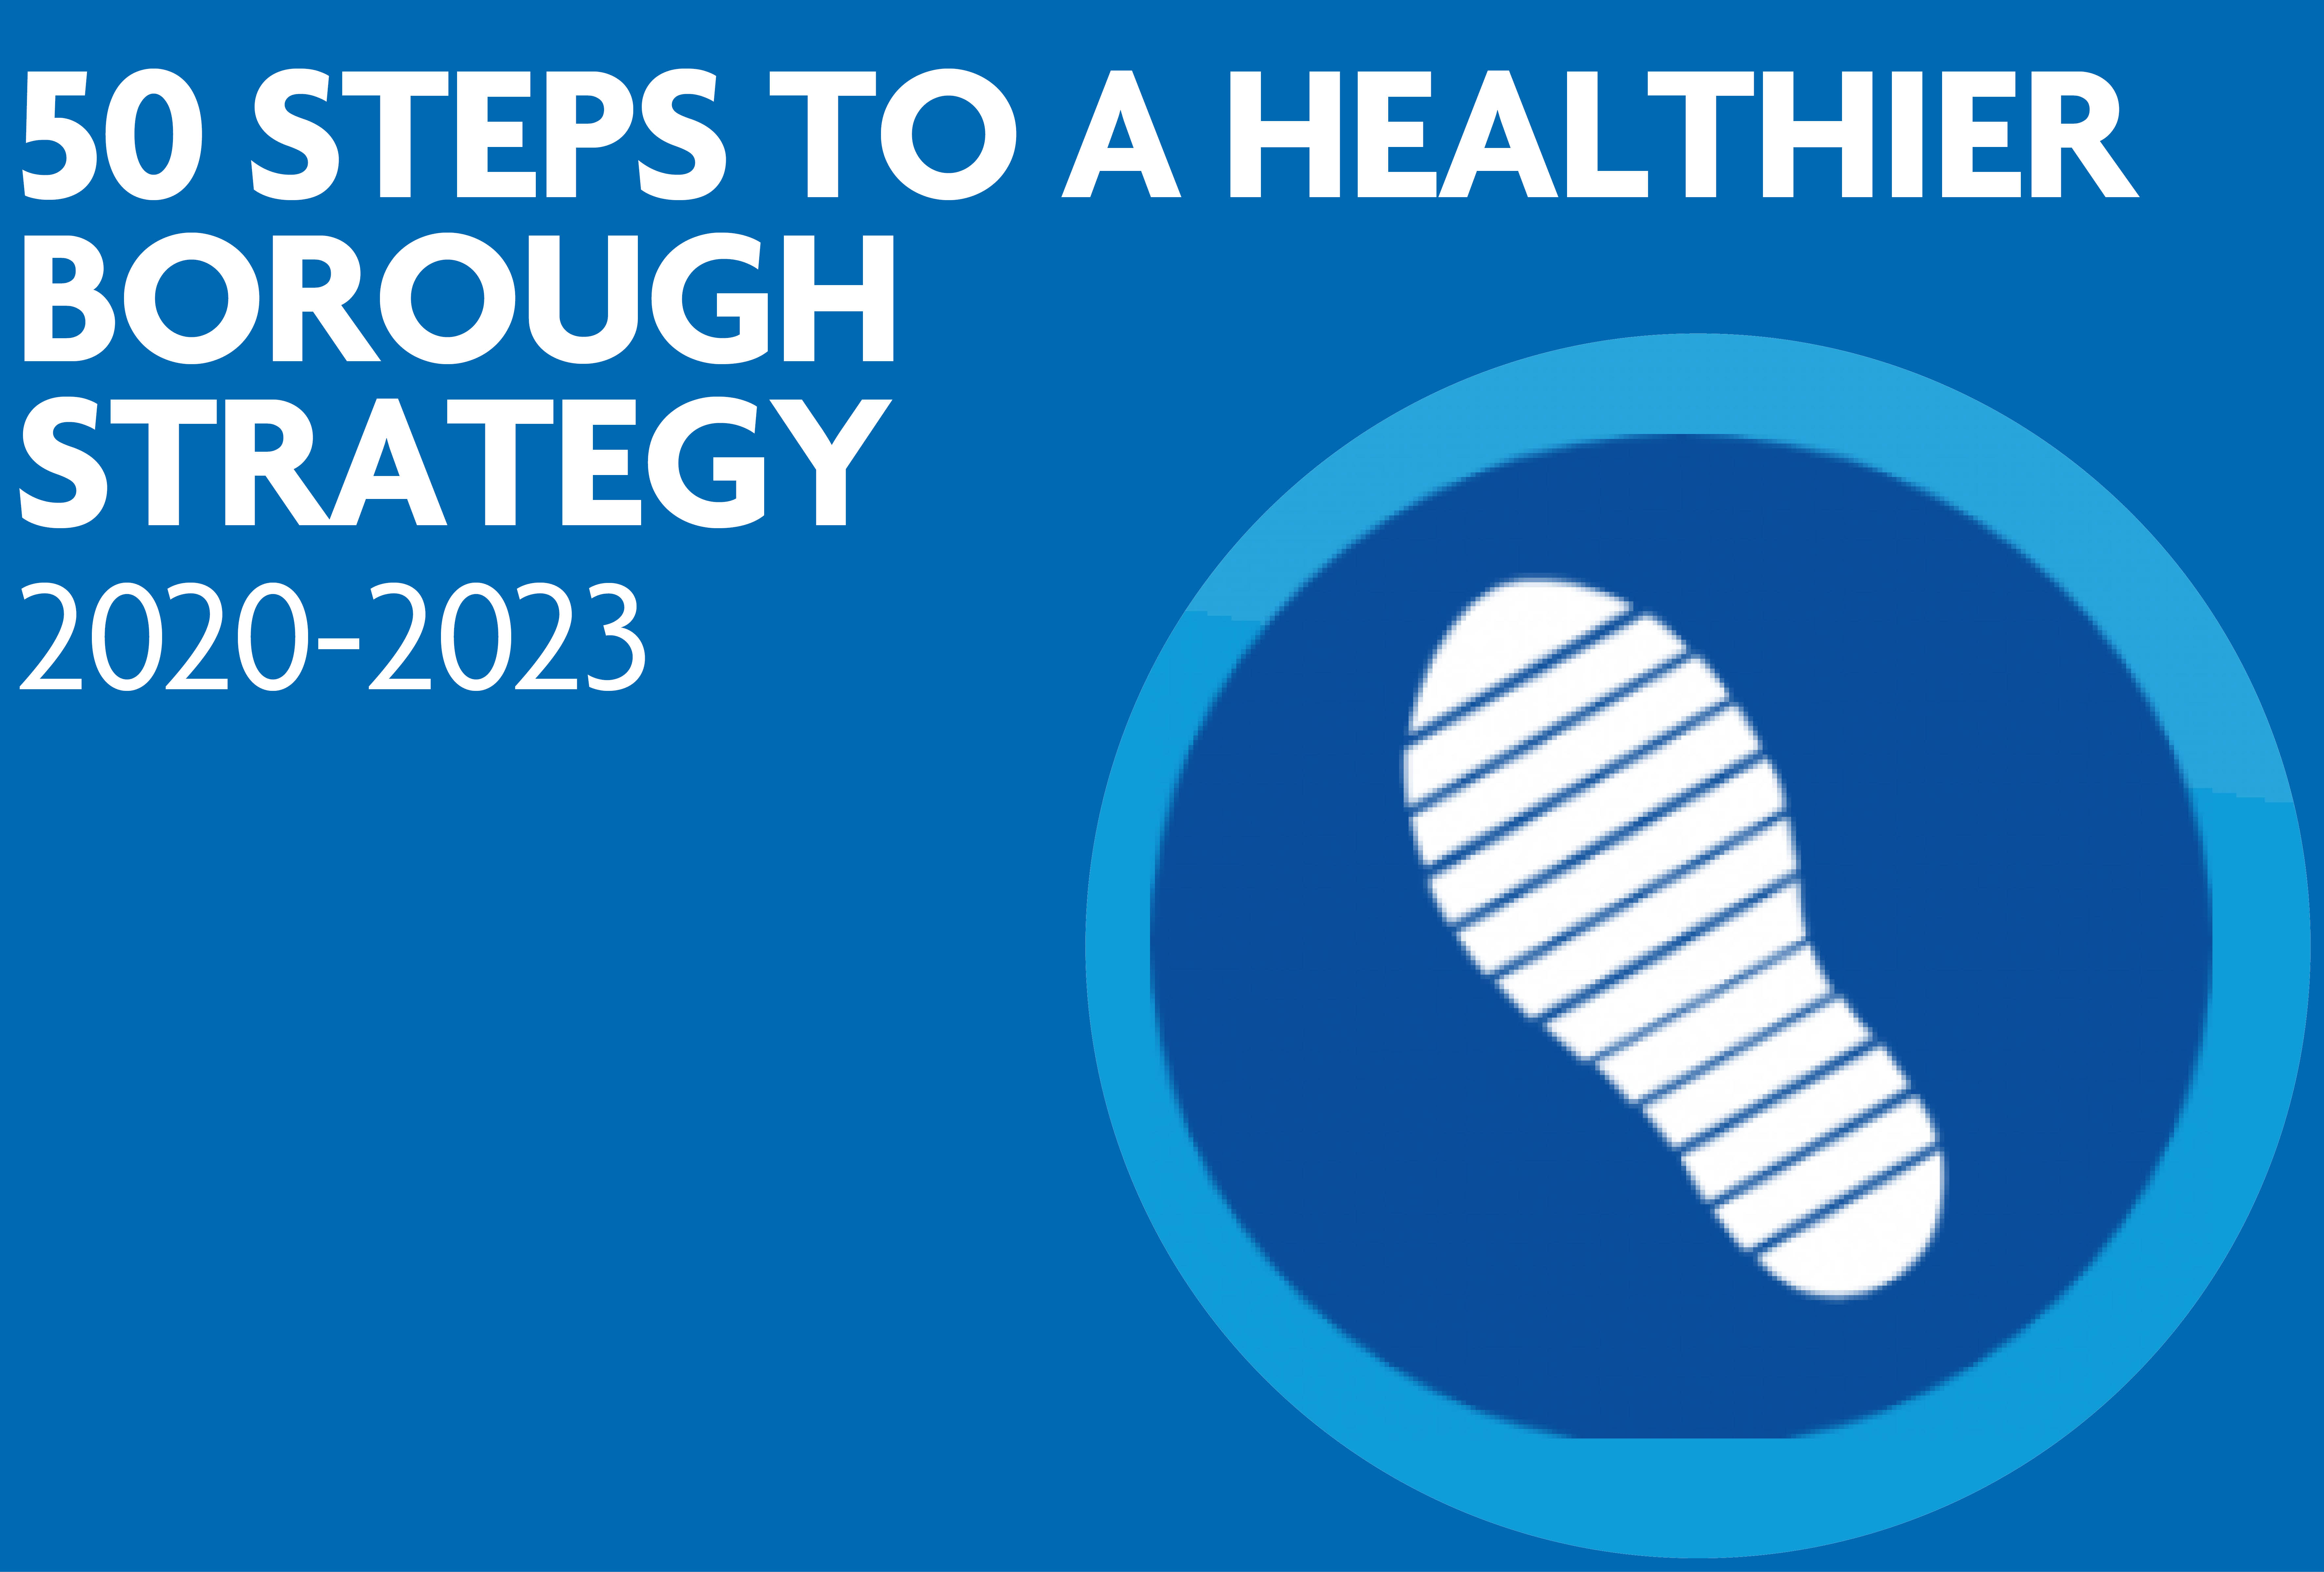 Healthier Strategy 2020-2023